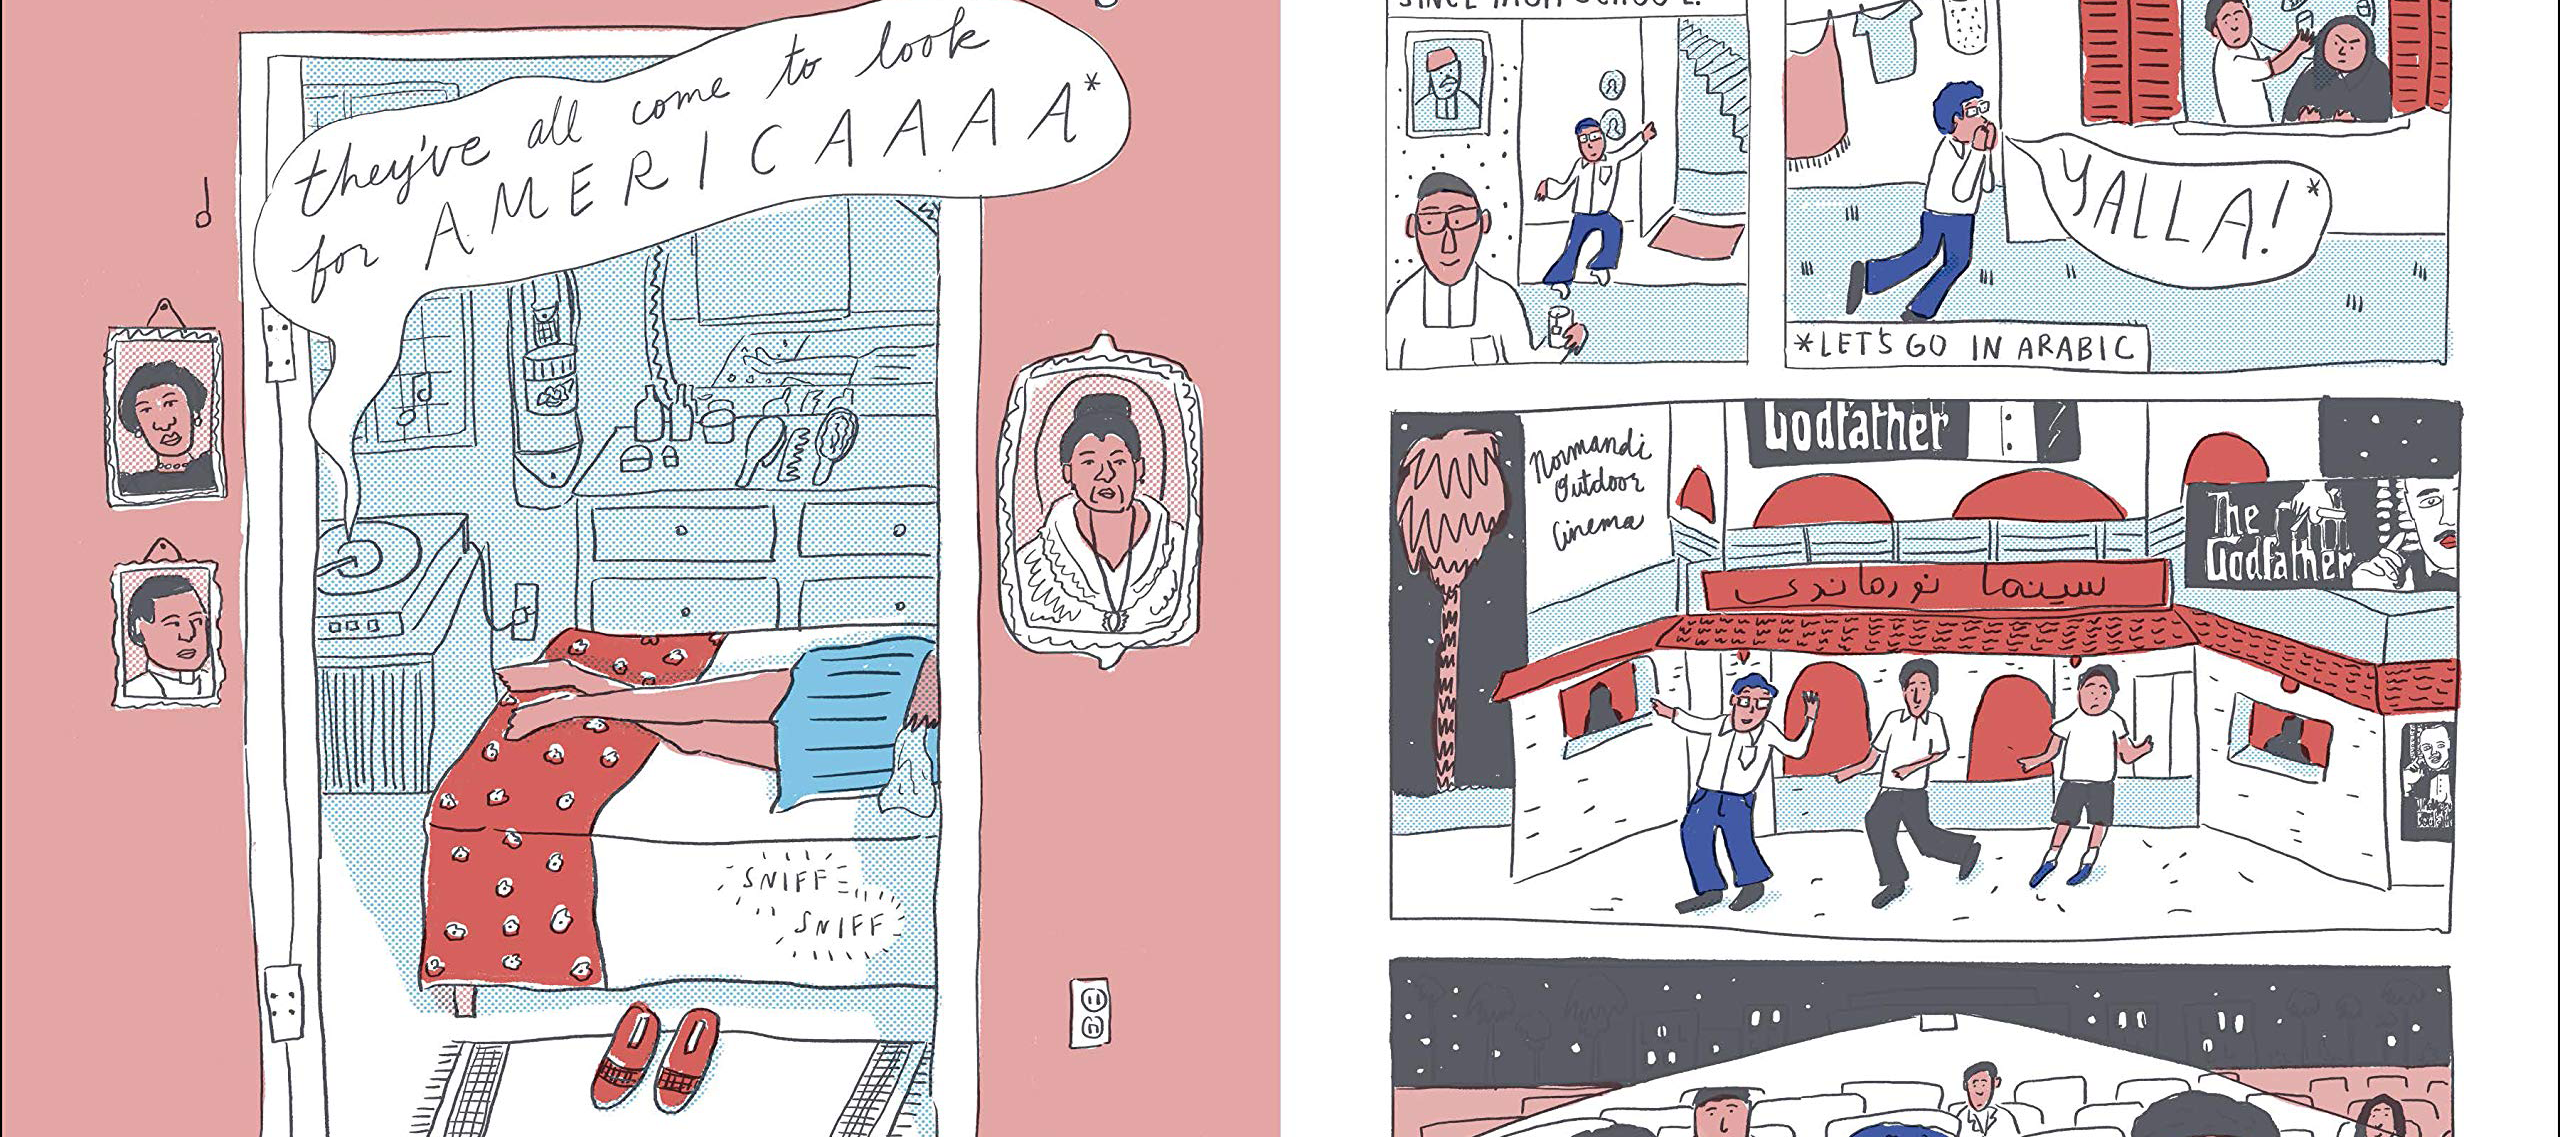 Loosely drawn comic panels in shades of red, white, blue, and black depicting a young woman lying on a bed listening to a record player singing 